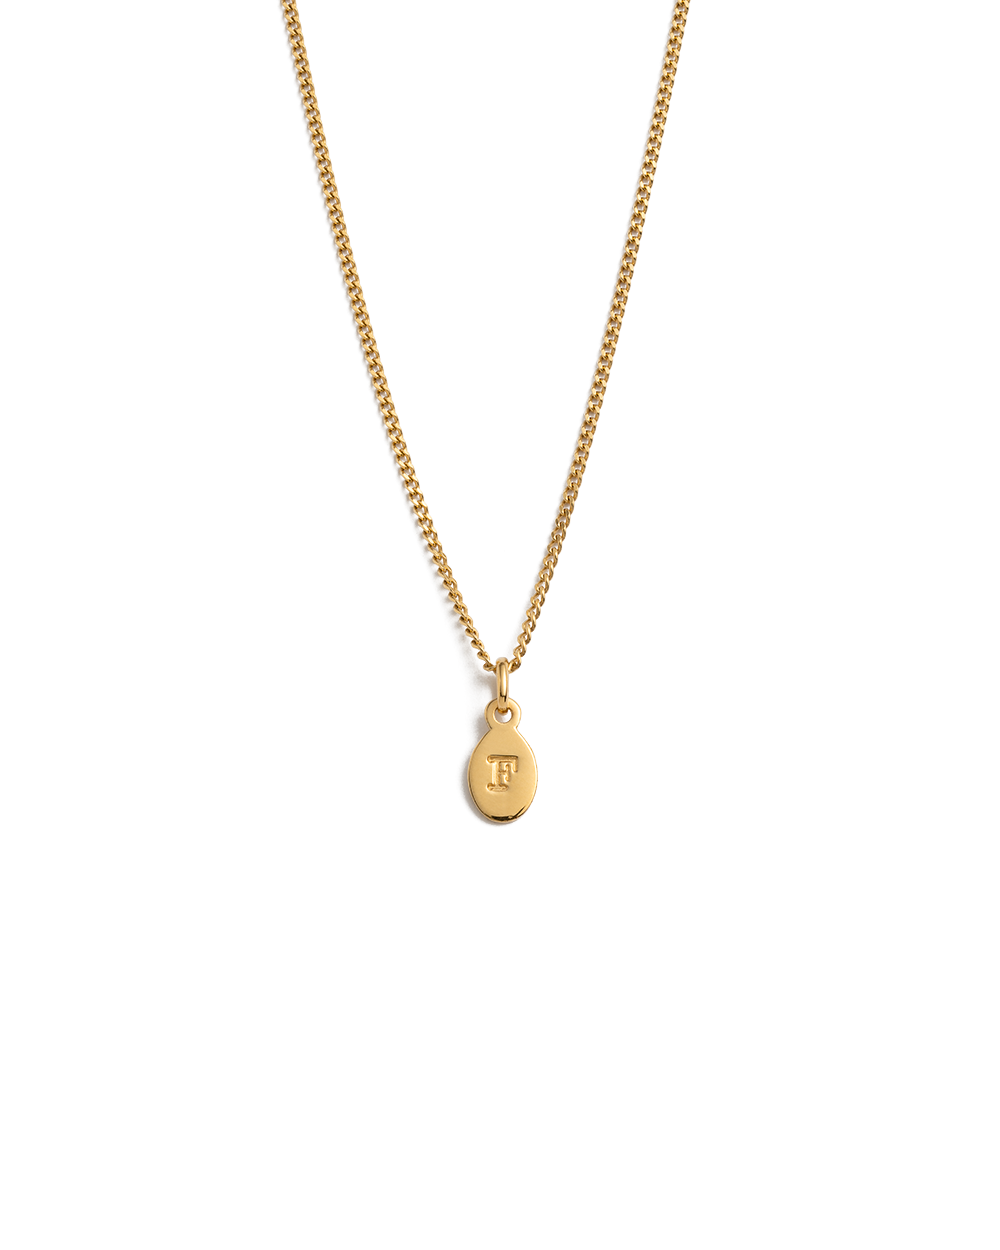 INITIAL NECKLACE A-Z (18K GOLD VERMEIL) – KIRSTIN ASH (United States)